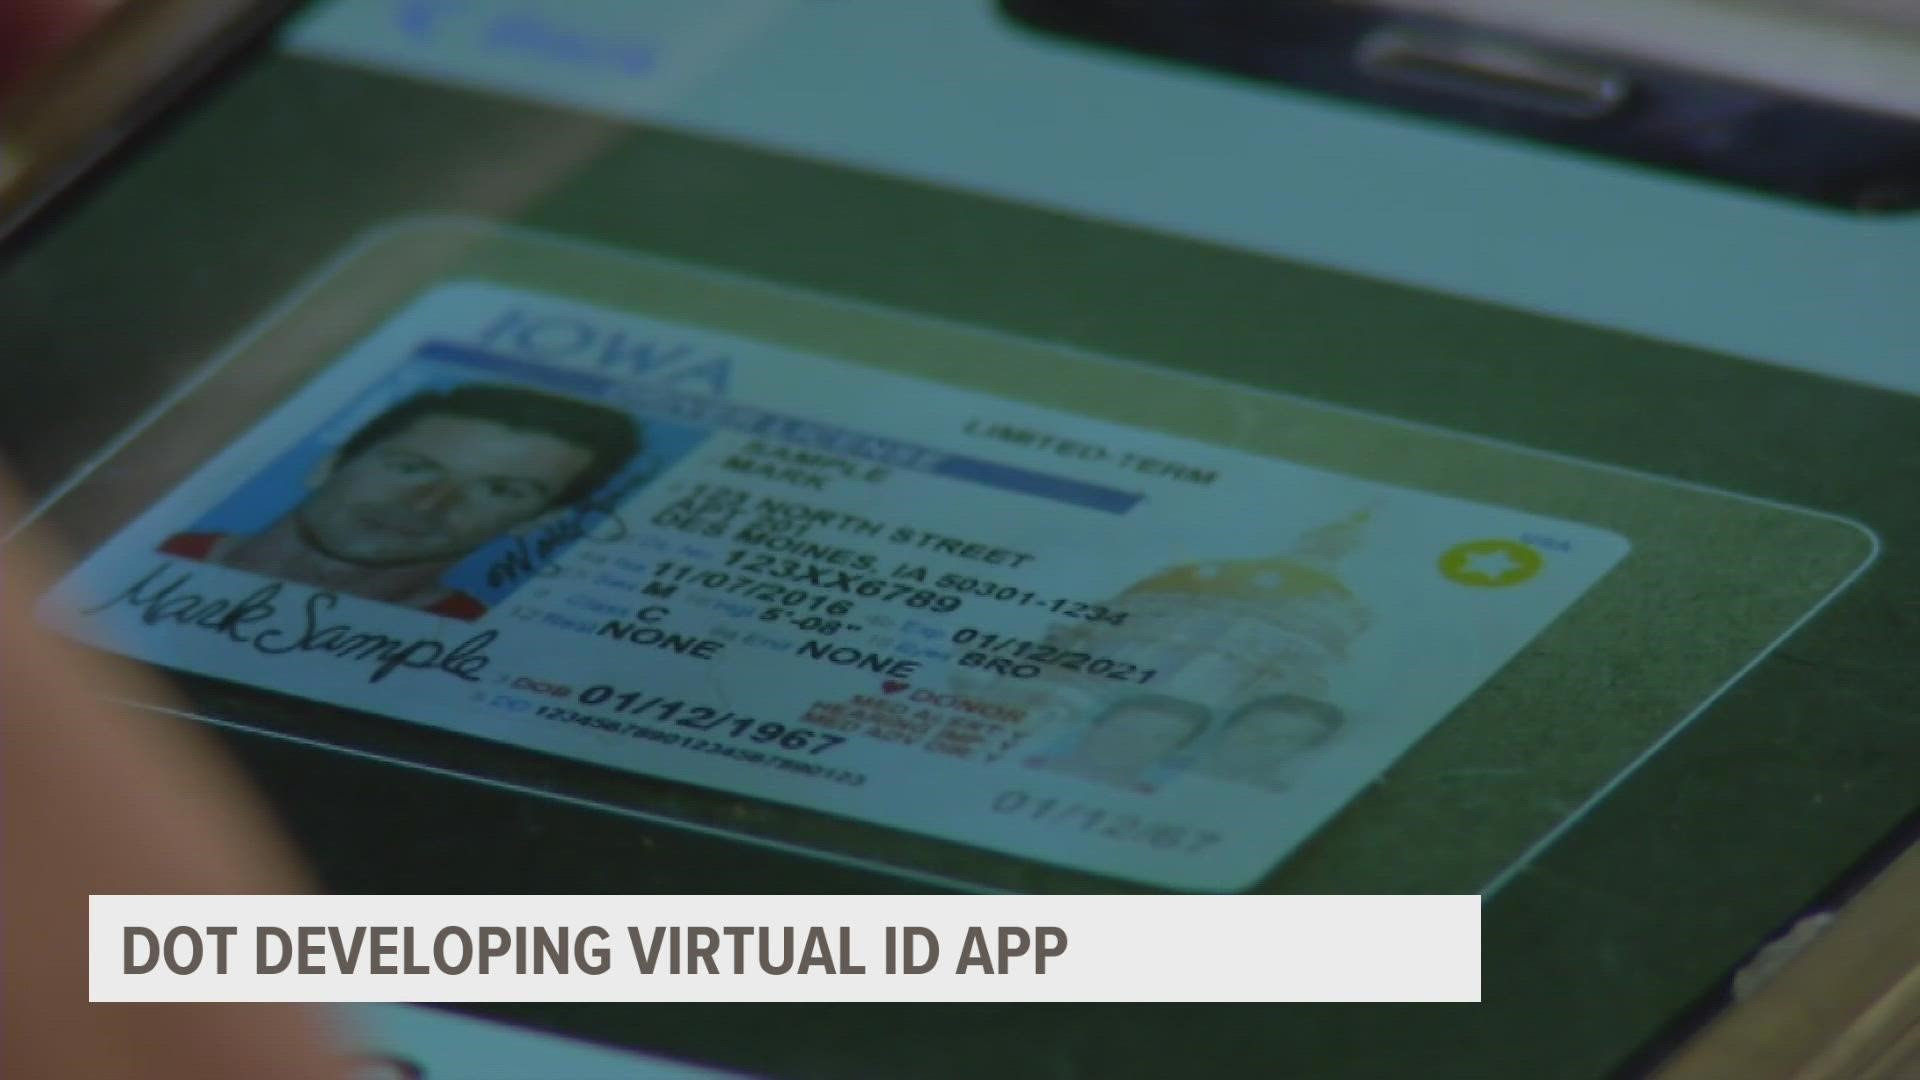 The state is planning to launch a pilot virtual ID app as early as January.